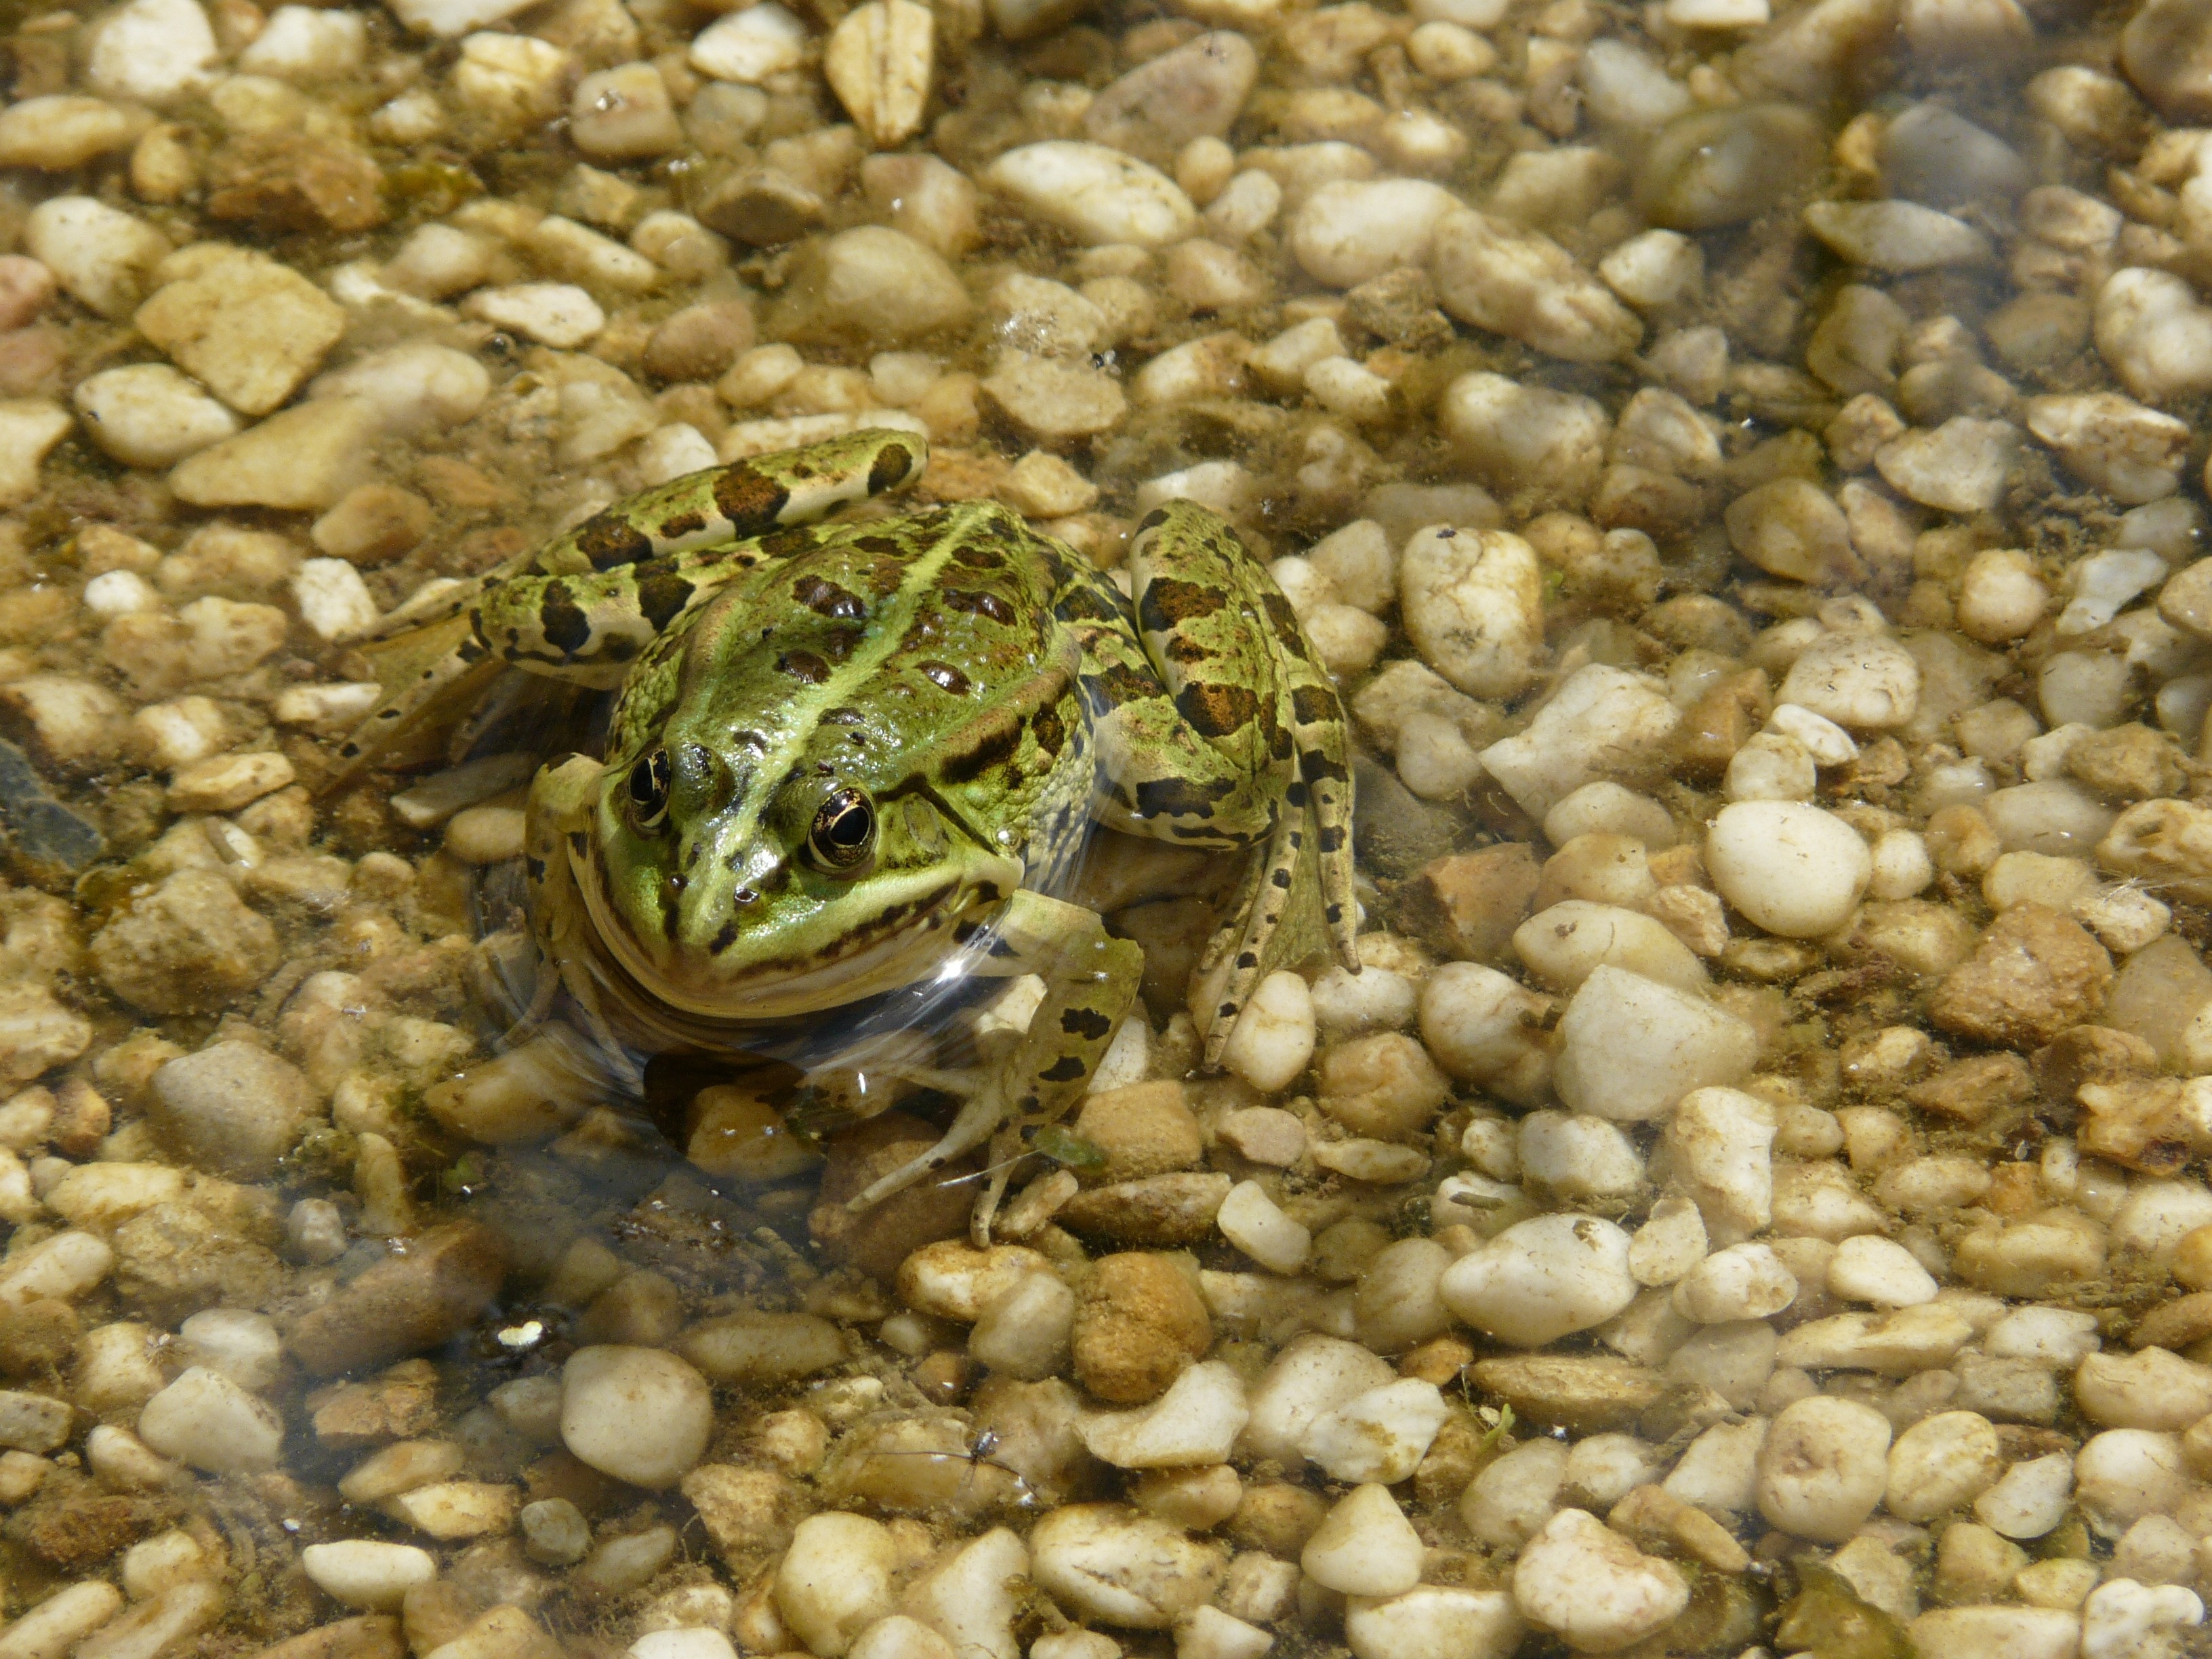 green and black spotted frog on white pebbles